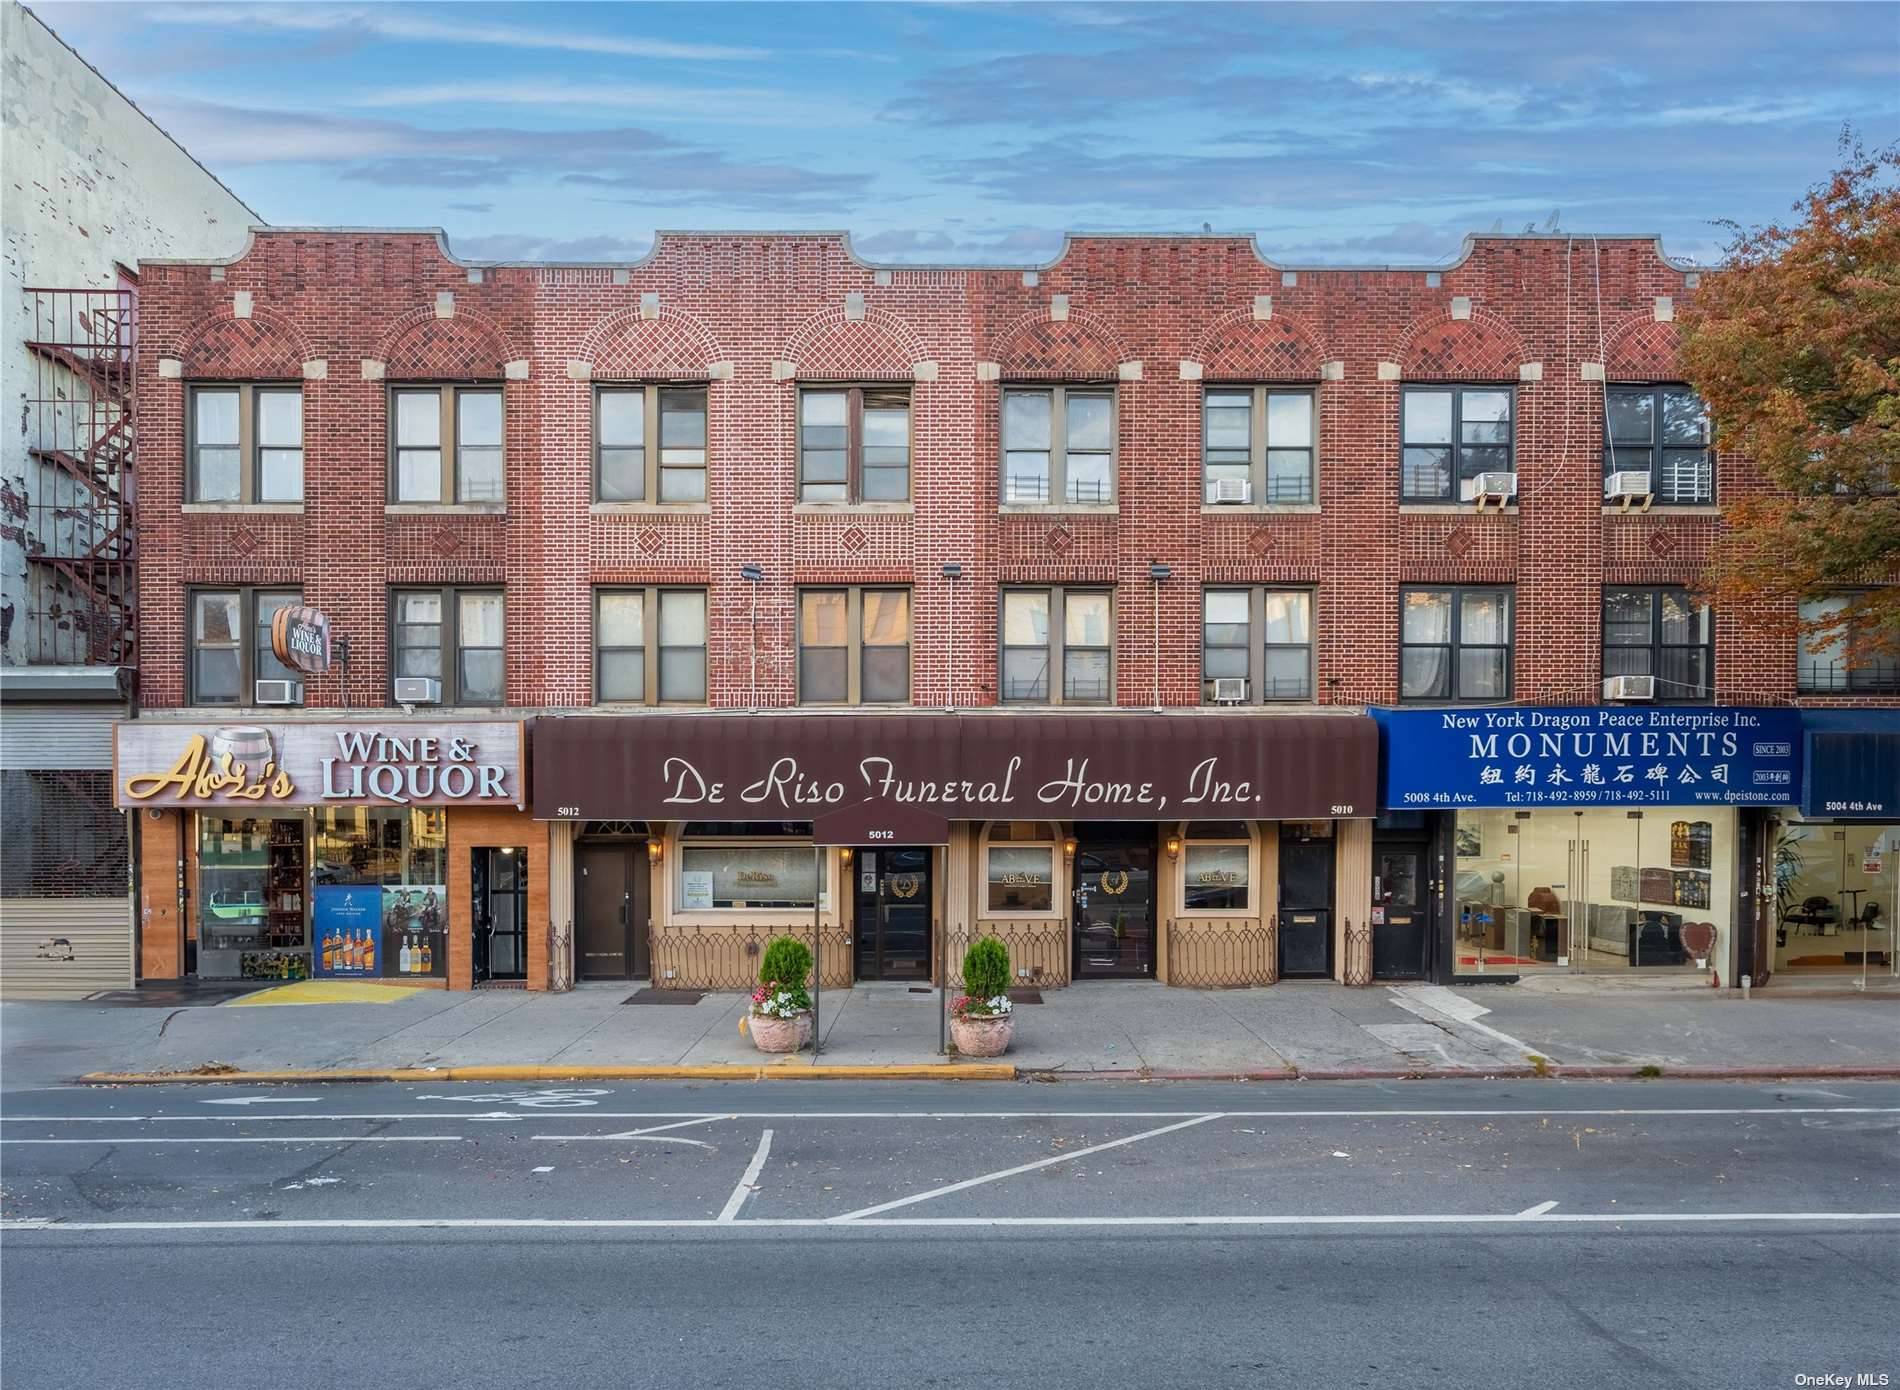 Introducing a compelling mixed use investment opportunity now available for sale at 5012 4th Avenue, situated in the highly coveted Sunset Park neighborhood of Brooklyn.